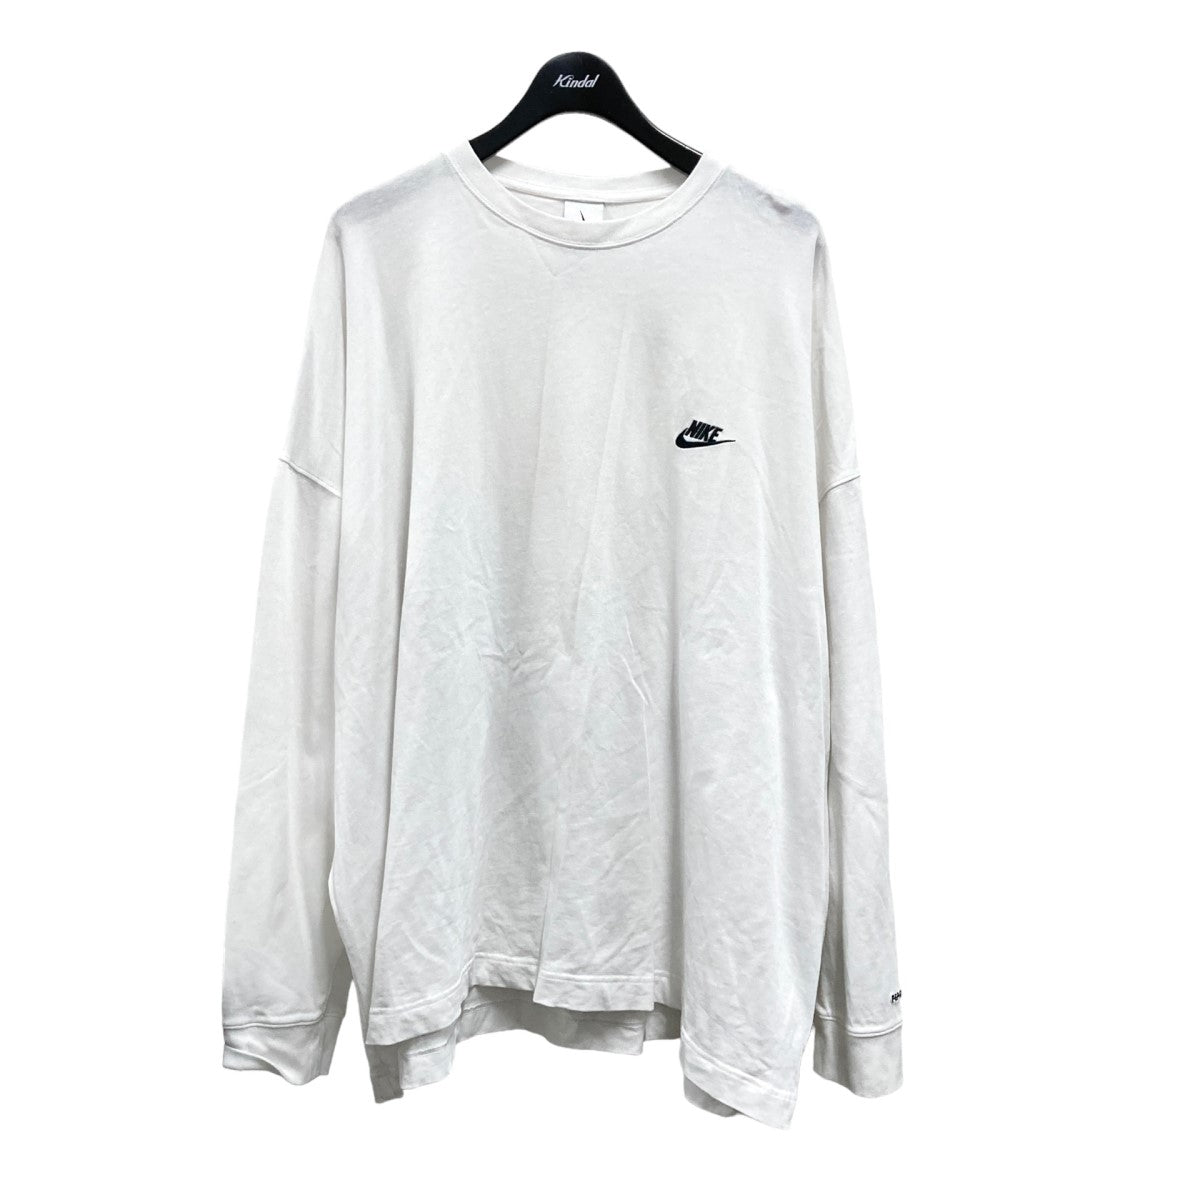 NIKE×PEACEMINUSONE L／S Tee プリントカットソー DR0097 100 DR0097 ...